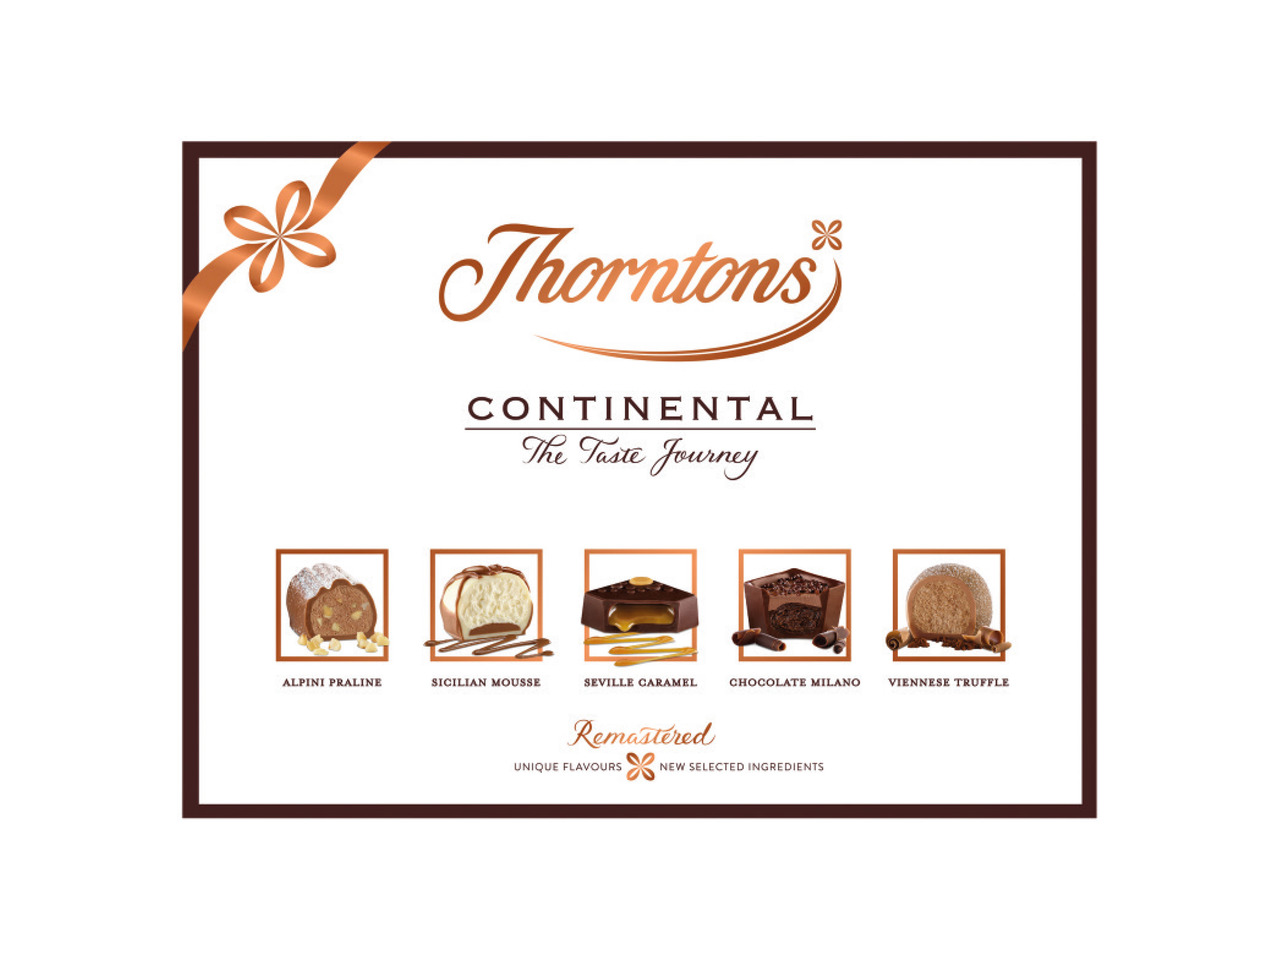 Thorntons Continental Chocolate Selection1